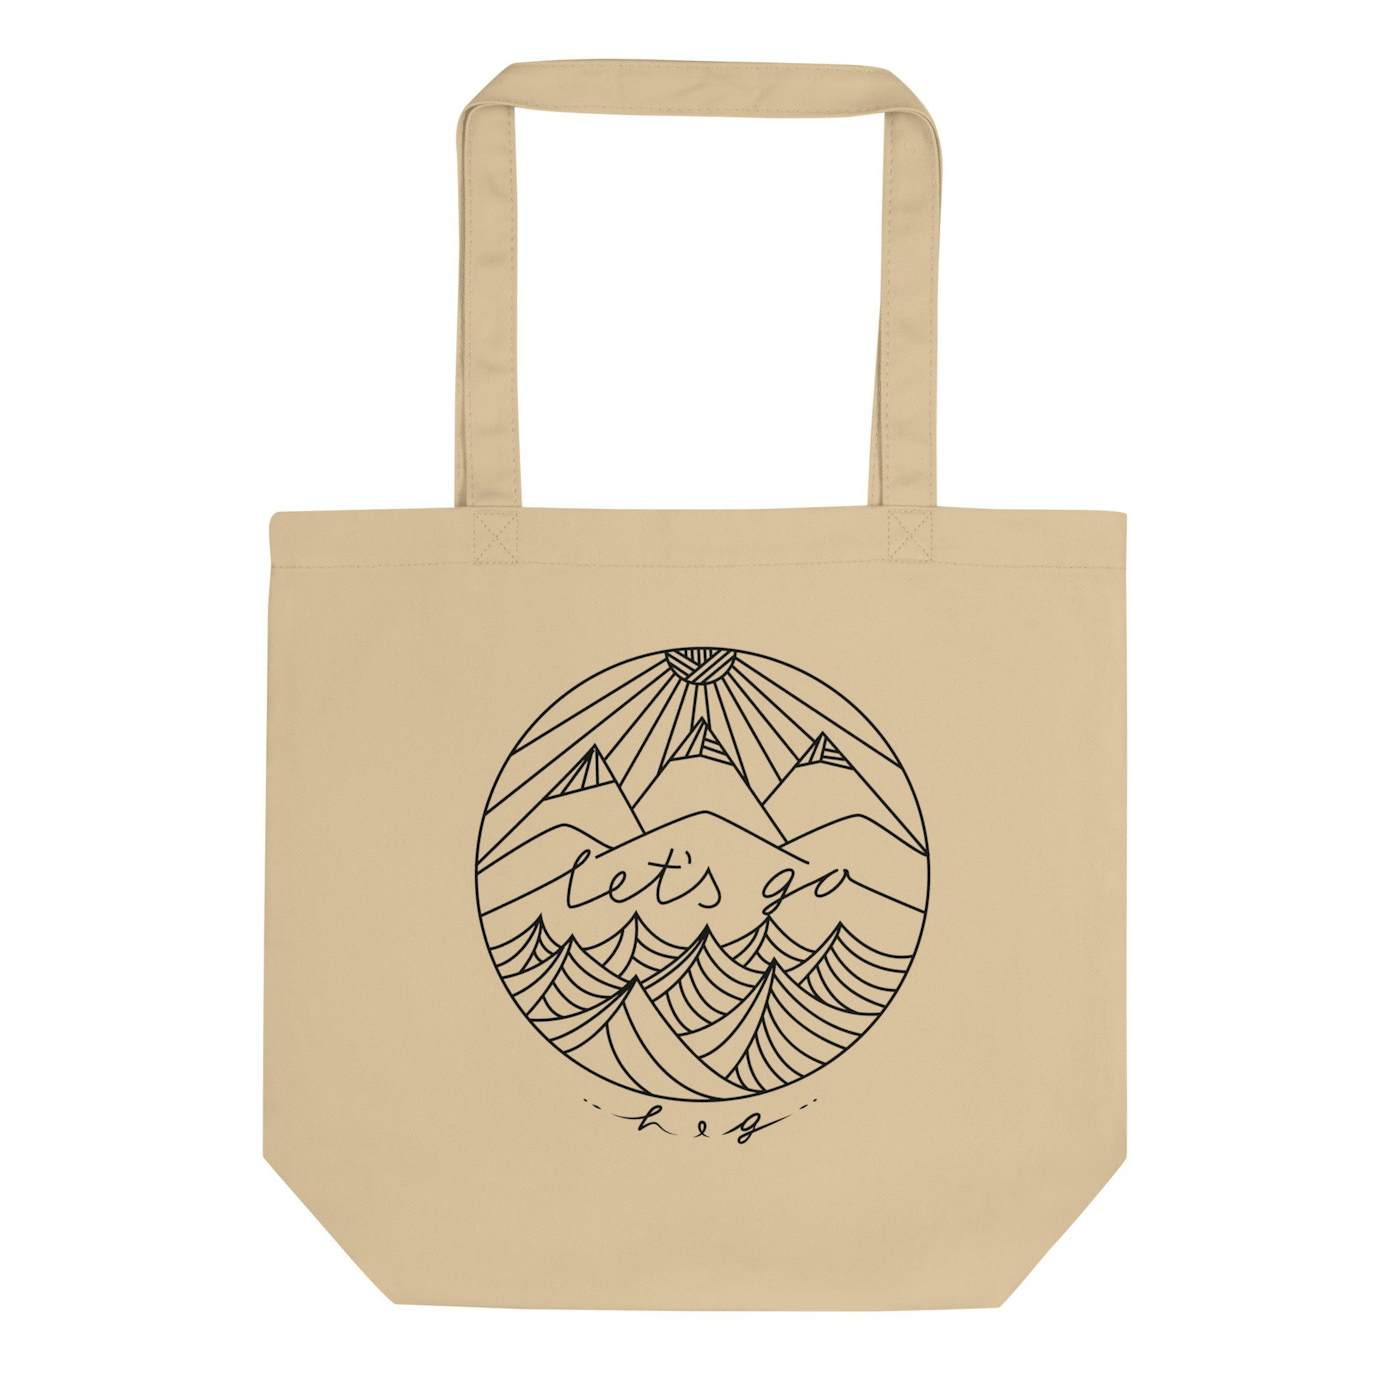 Handsome and Gretyl "Let's Go" Eco Tote Bag